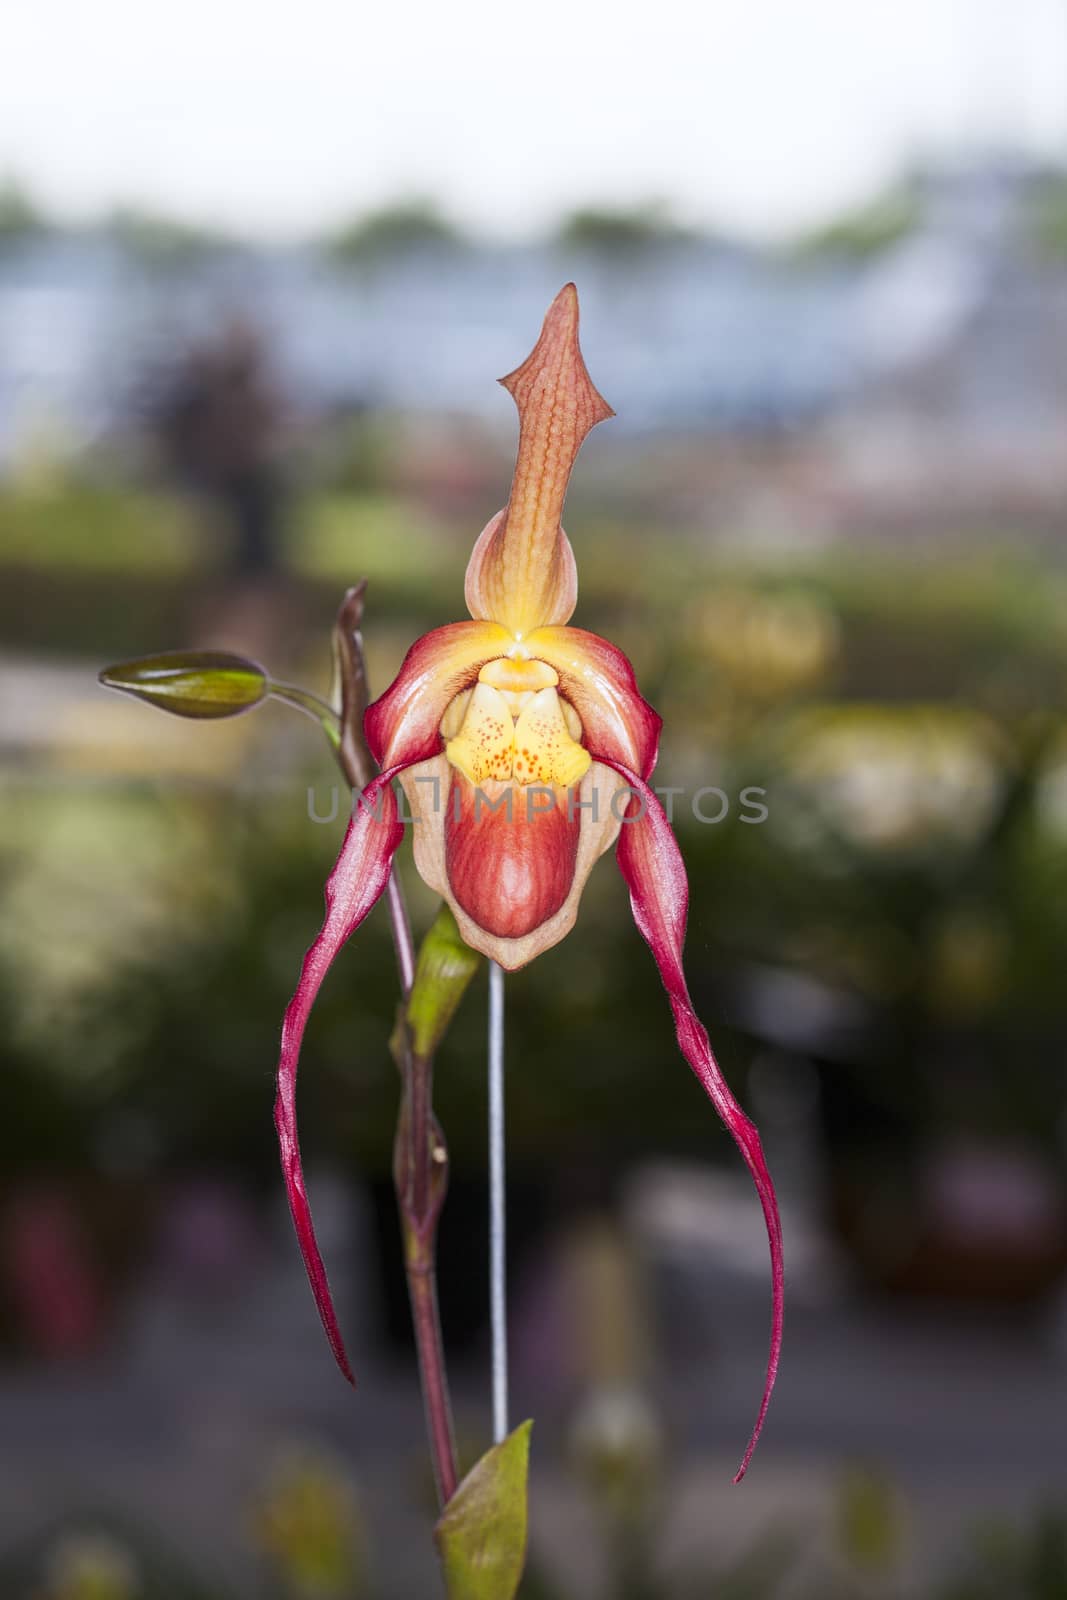 Orchid flower in tropical garden, Chiang Mai, Thailand.  Paphiopedilum, often called the Venus slipper, is a genus of the Lady slipper.